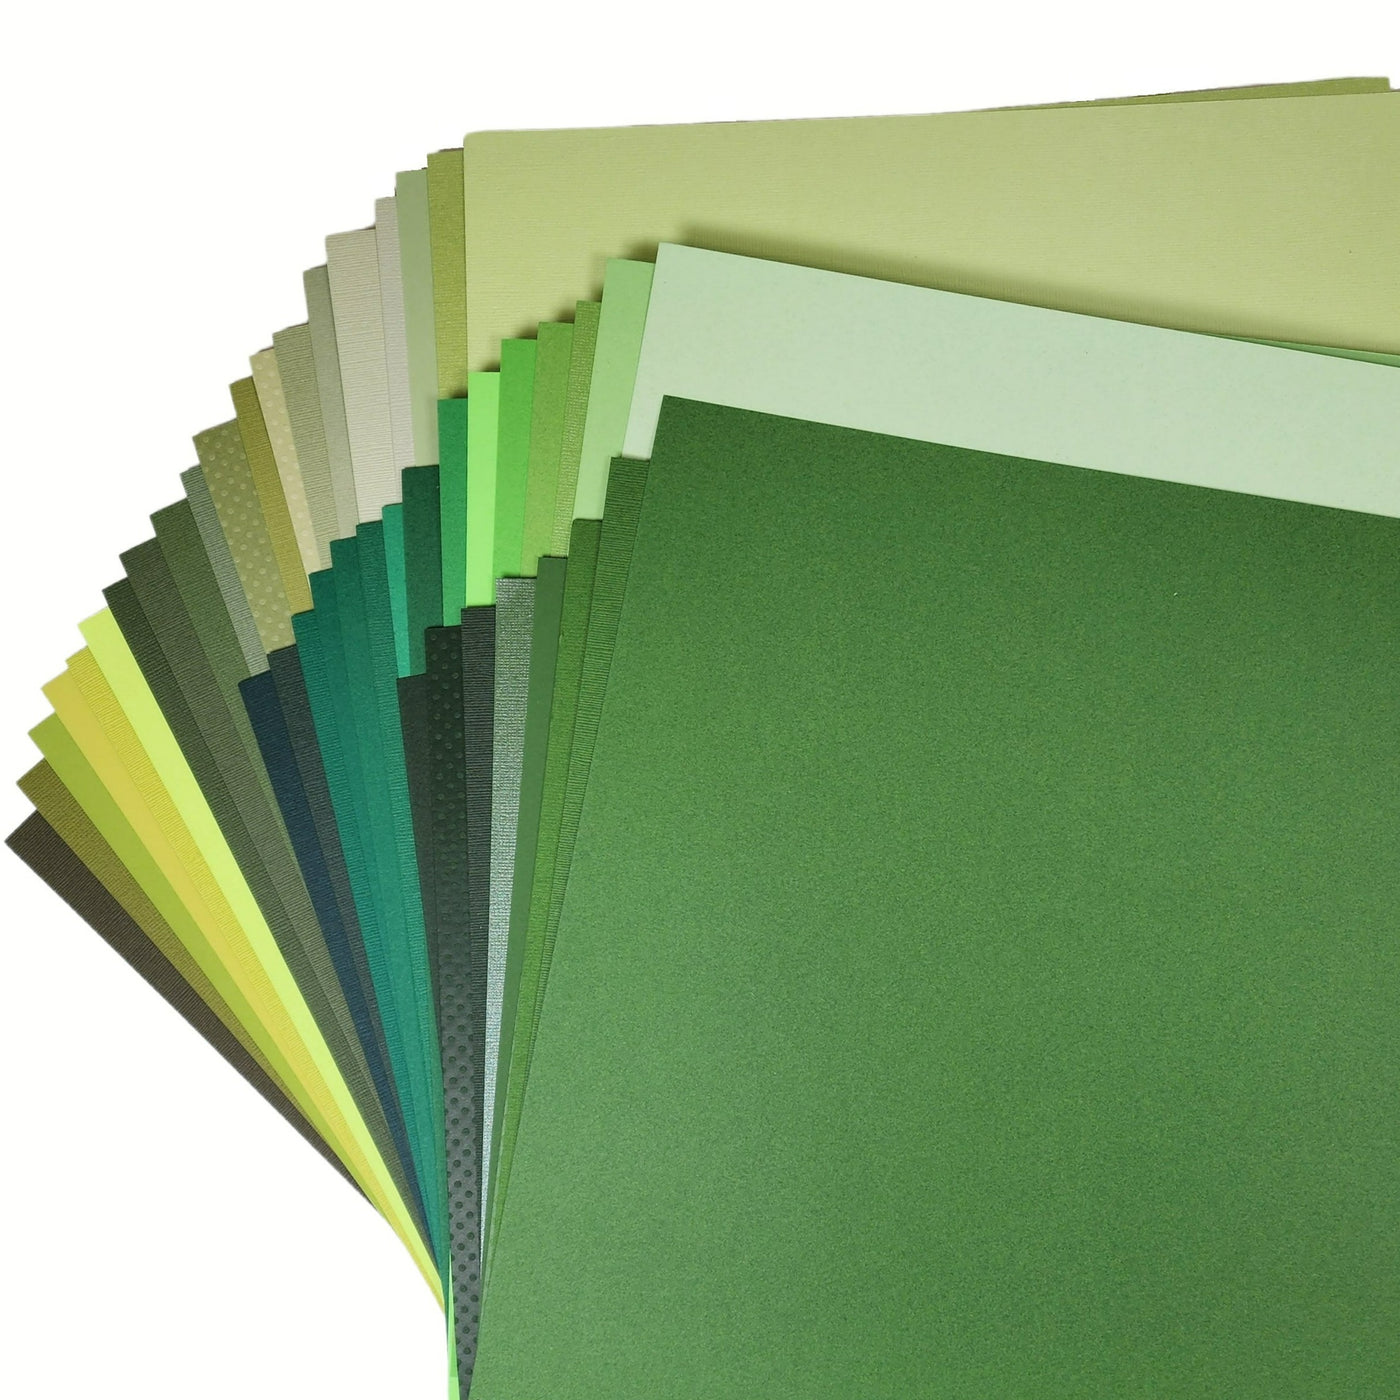 Bazzill Green Cardstock Variety Pack